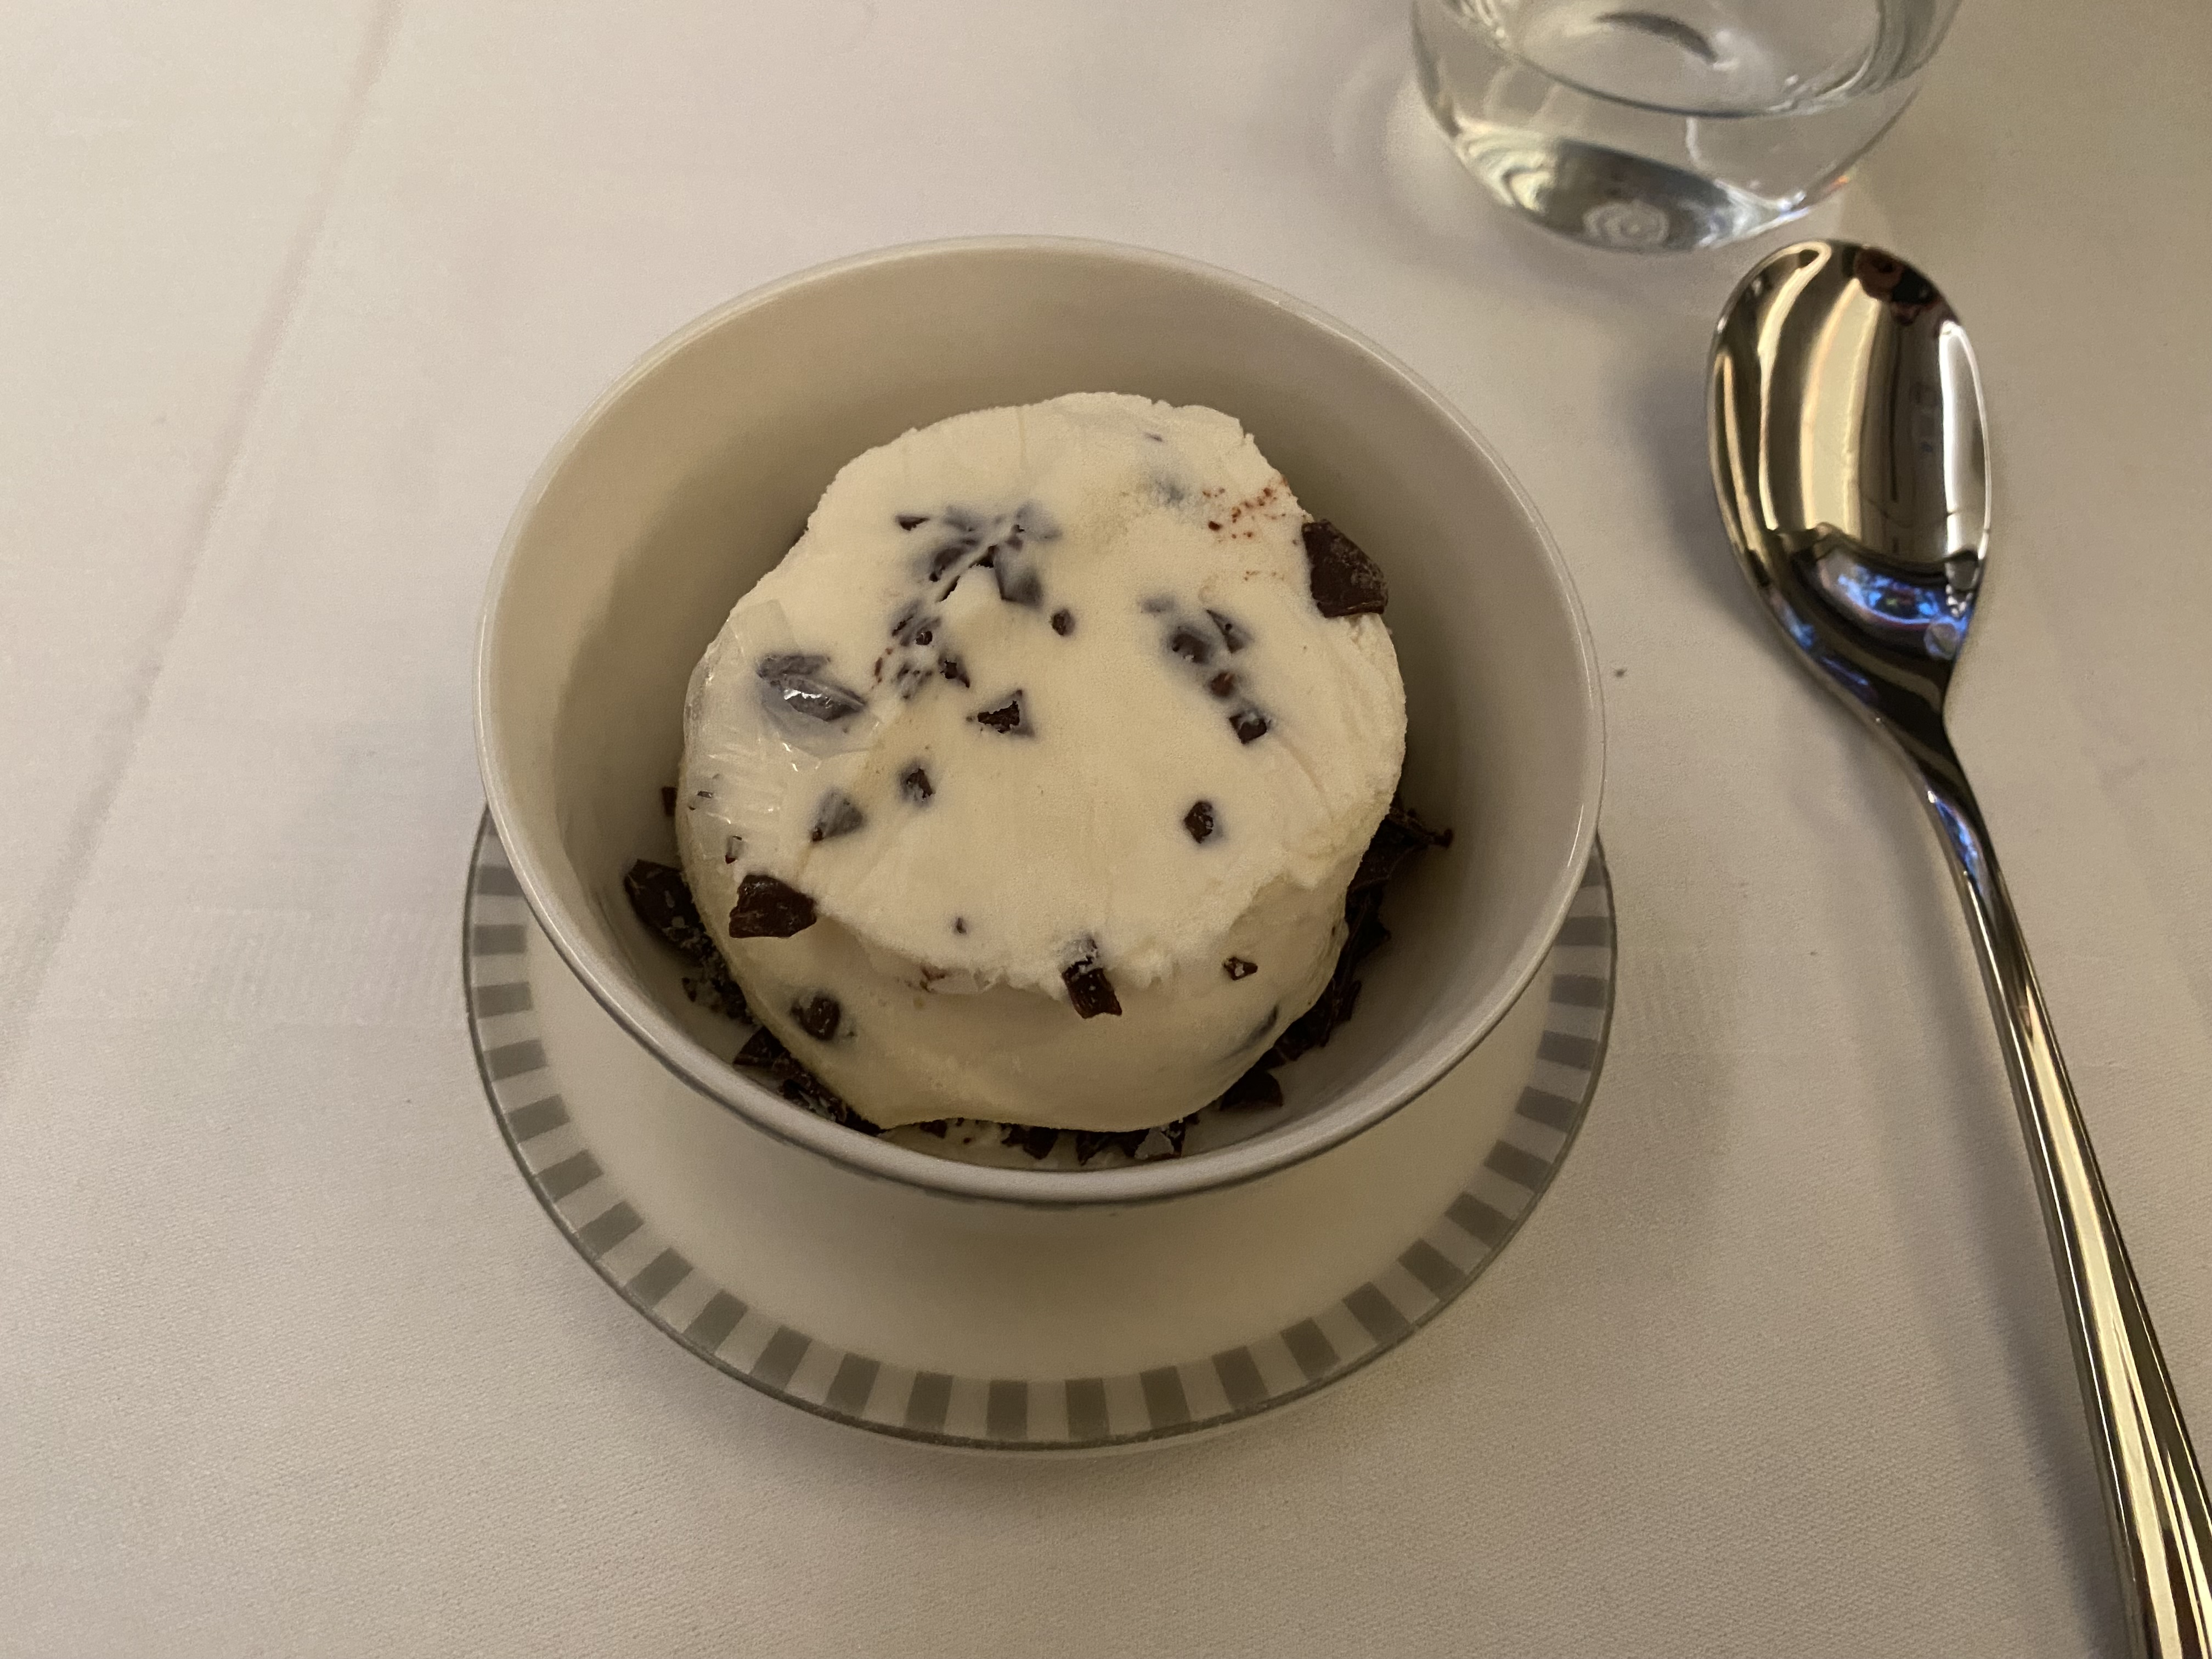 a bowl of ice cream with chocolate chips on top